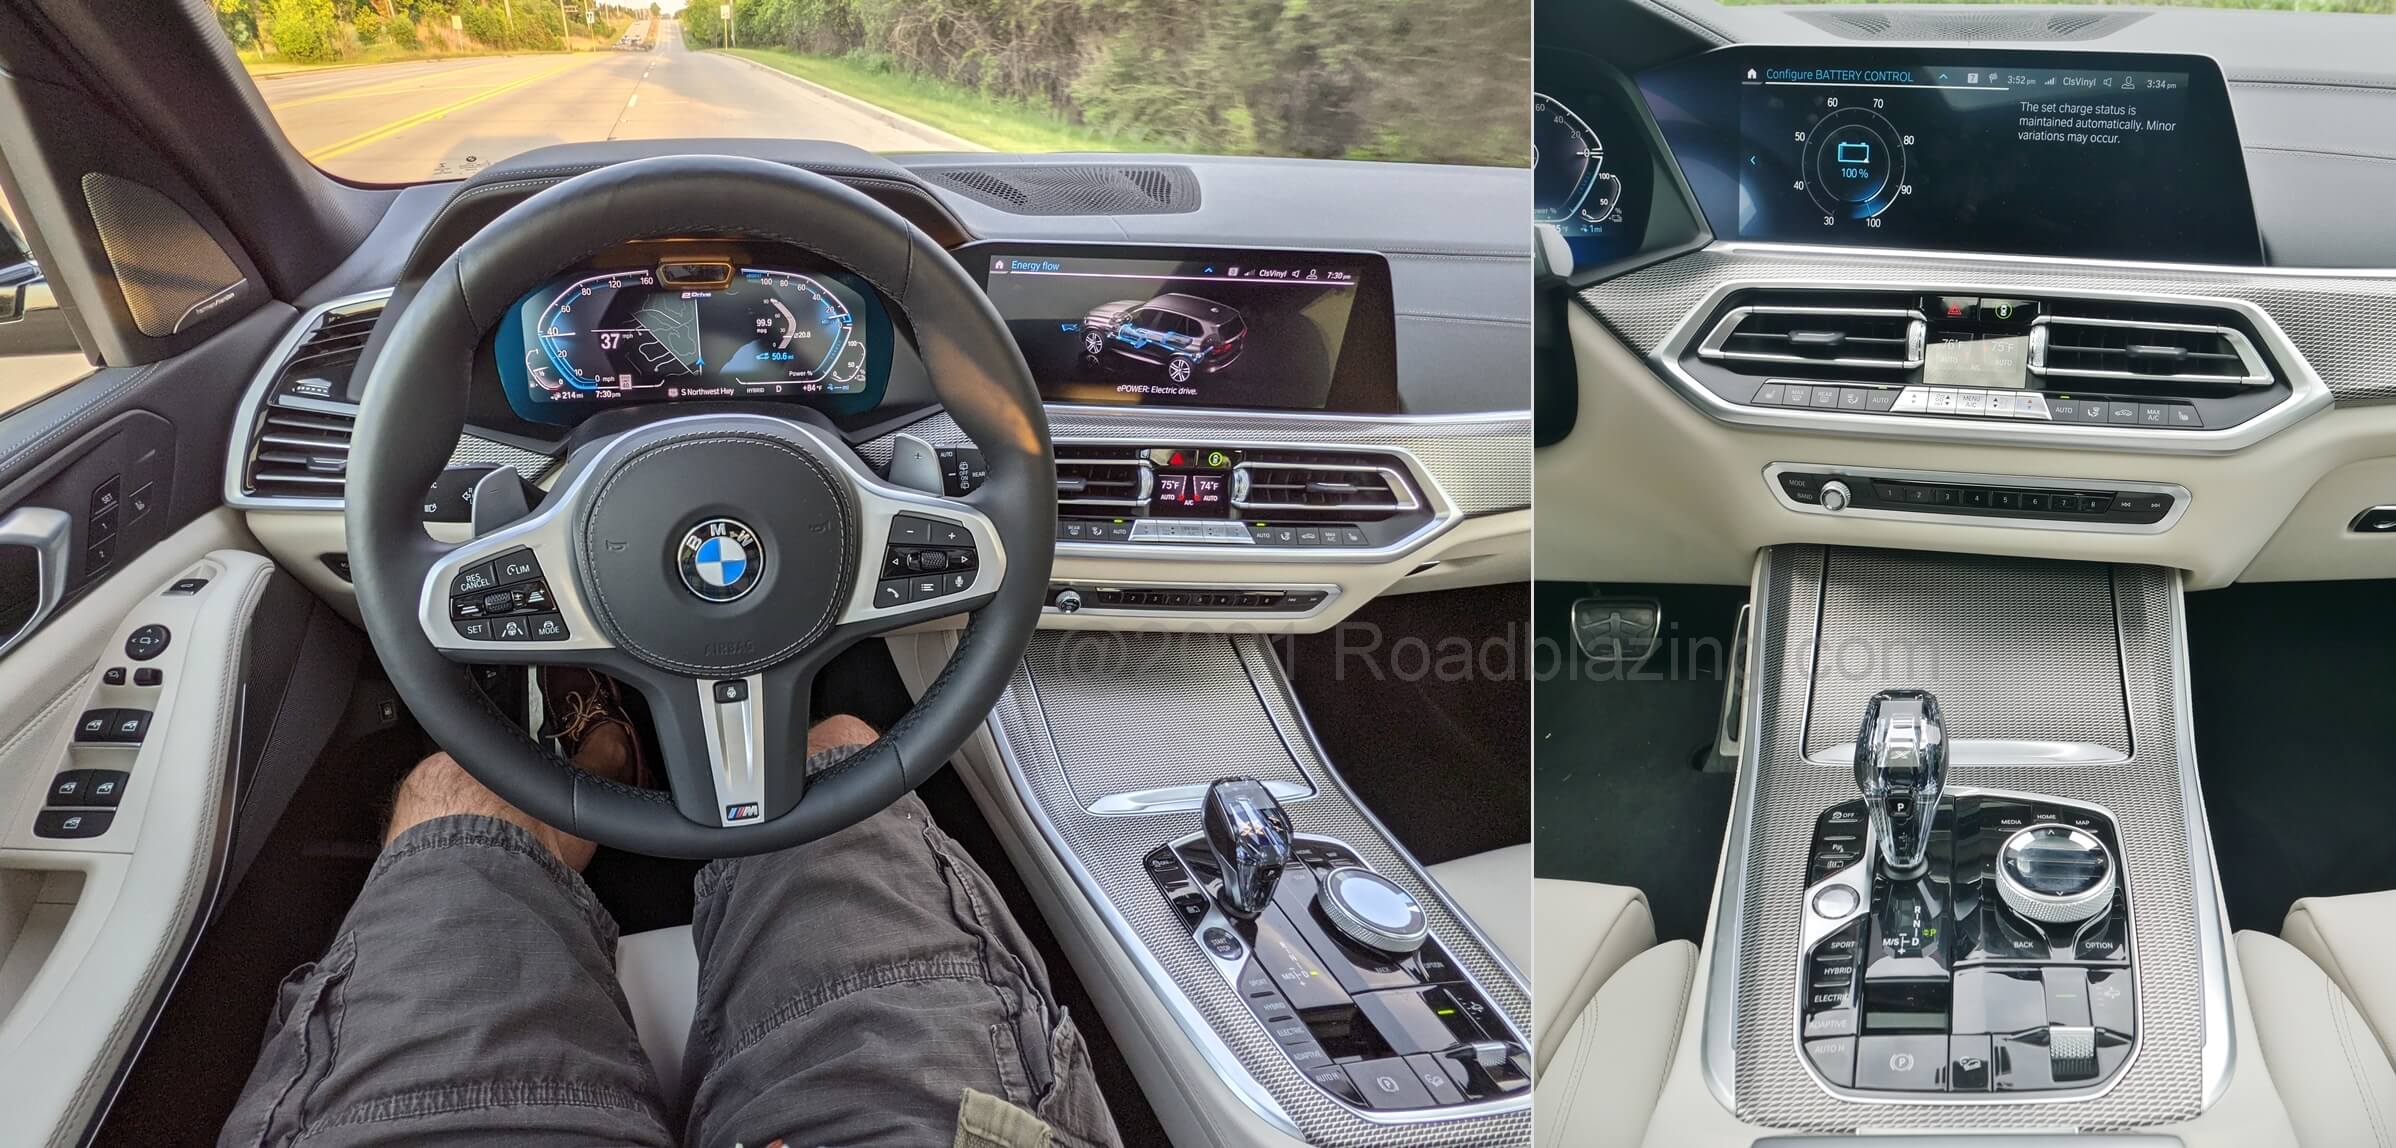 2021 BMW X5 xDrive 45e: 30 miles of plug-in charged Battery Electric range can be preserved via a variable Battery Hold mode.